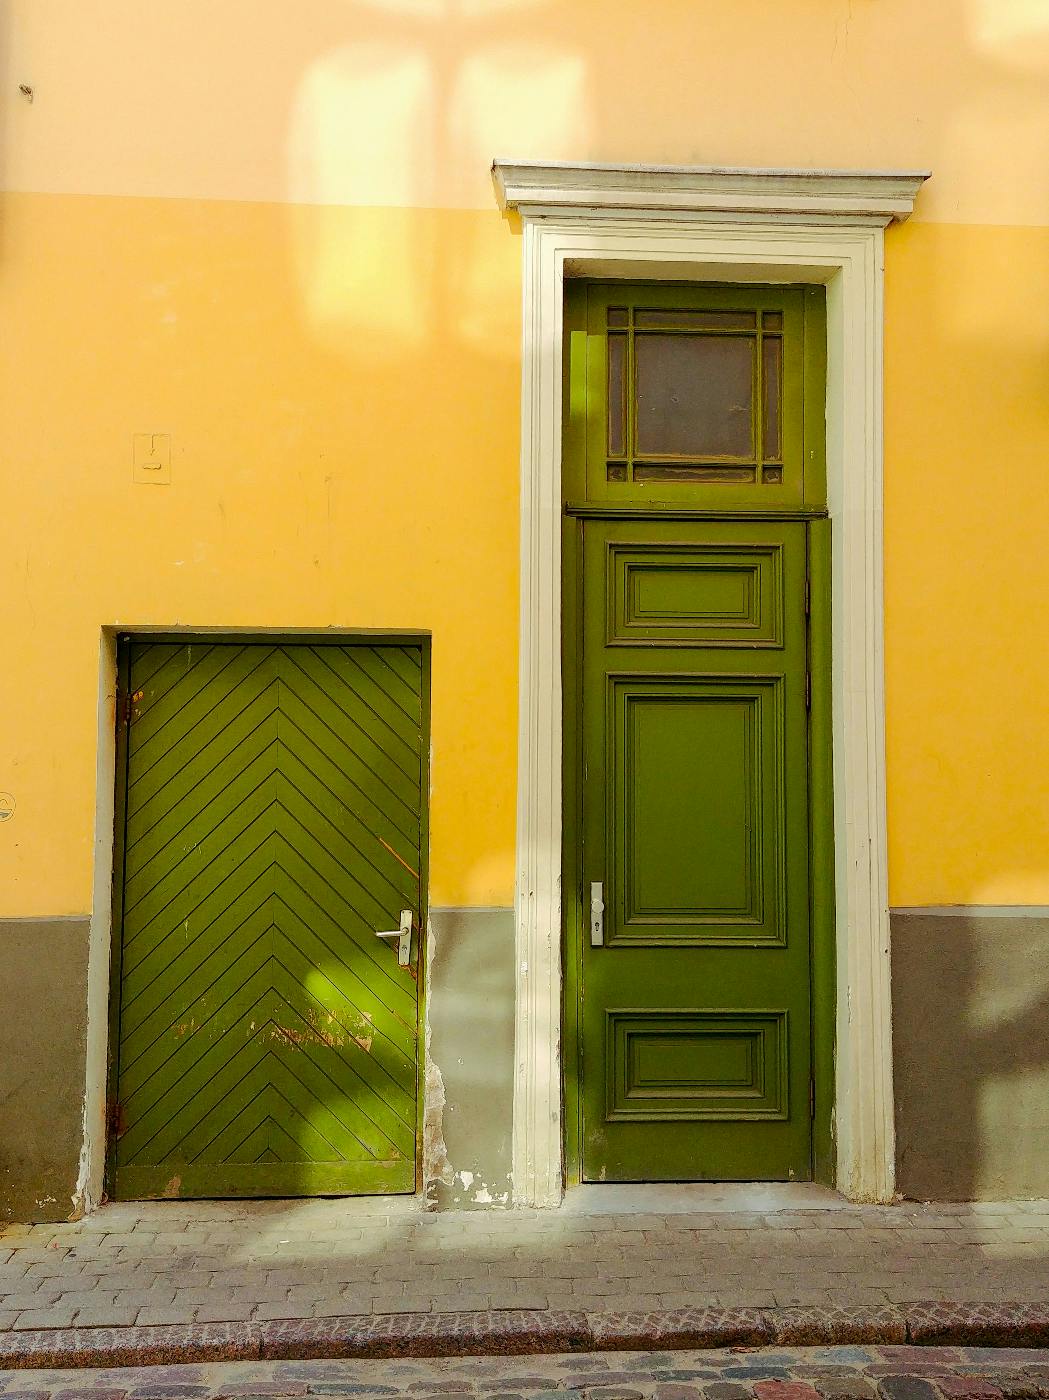 Short and tall green doors in a yellow wall